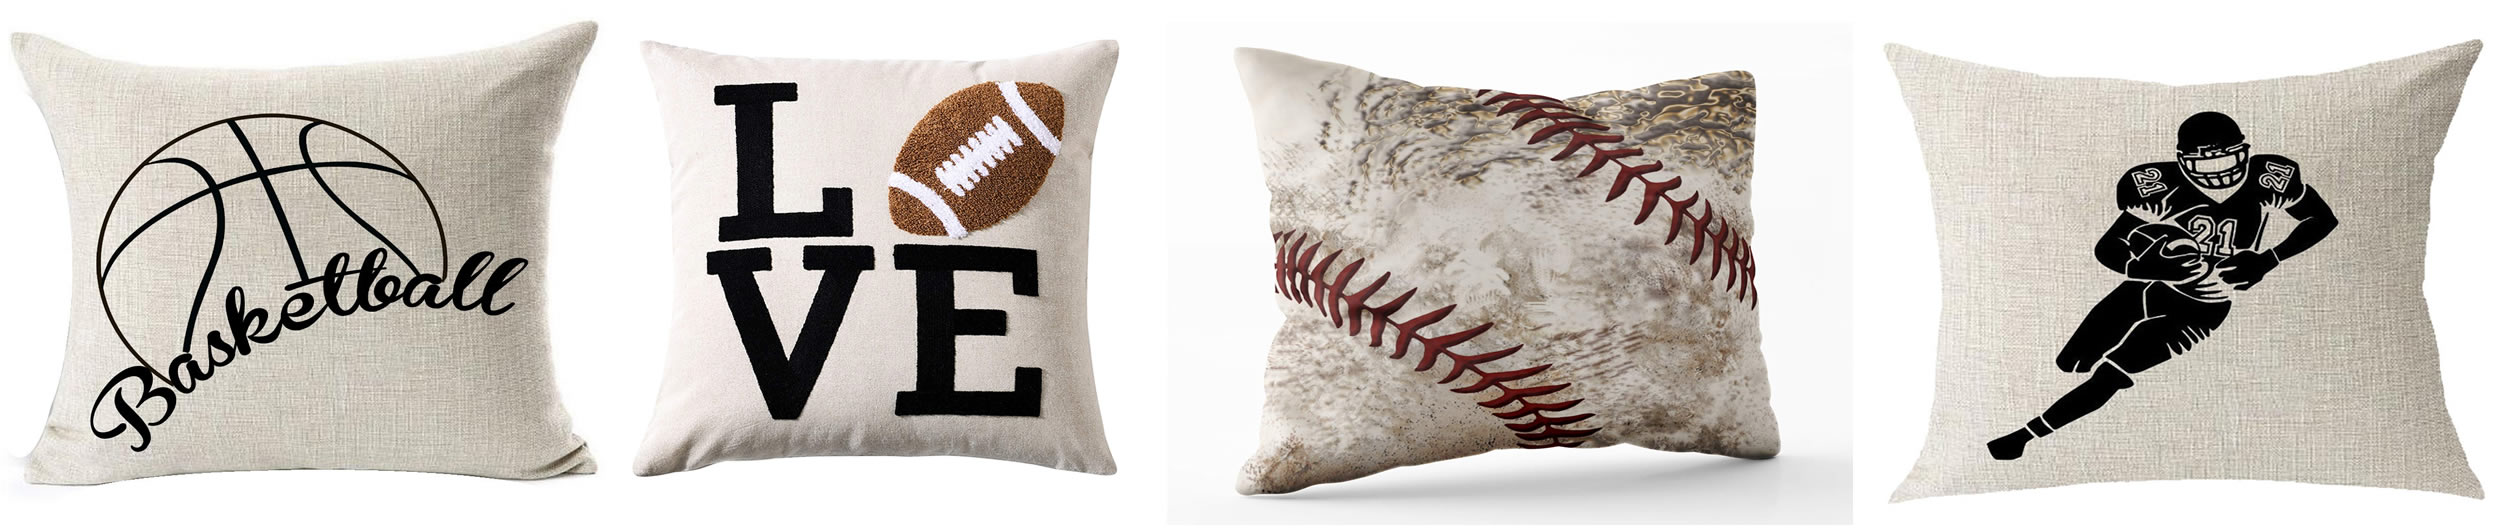 sports themed pillow covers